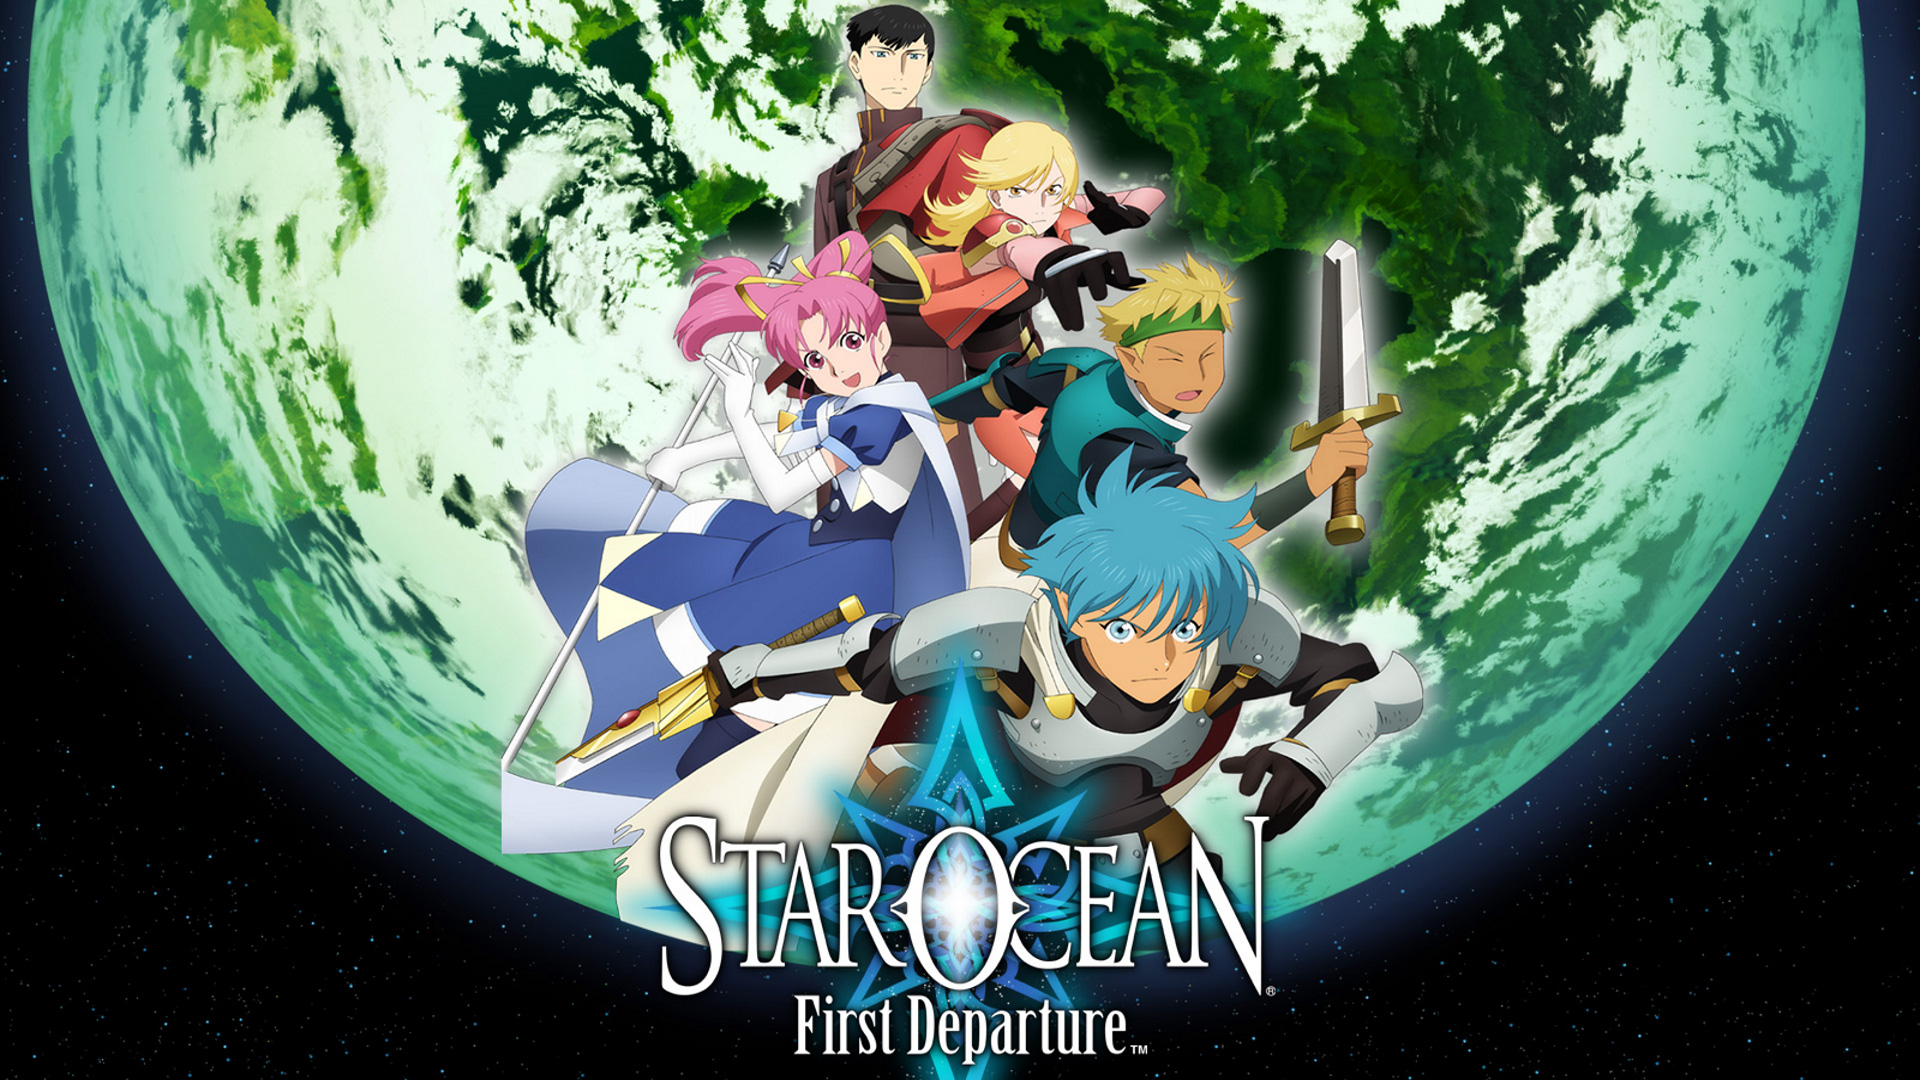 Video Game Star Ocean: First Departure HD Wallpaper | Background Image